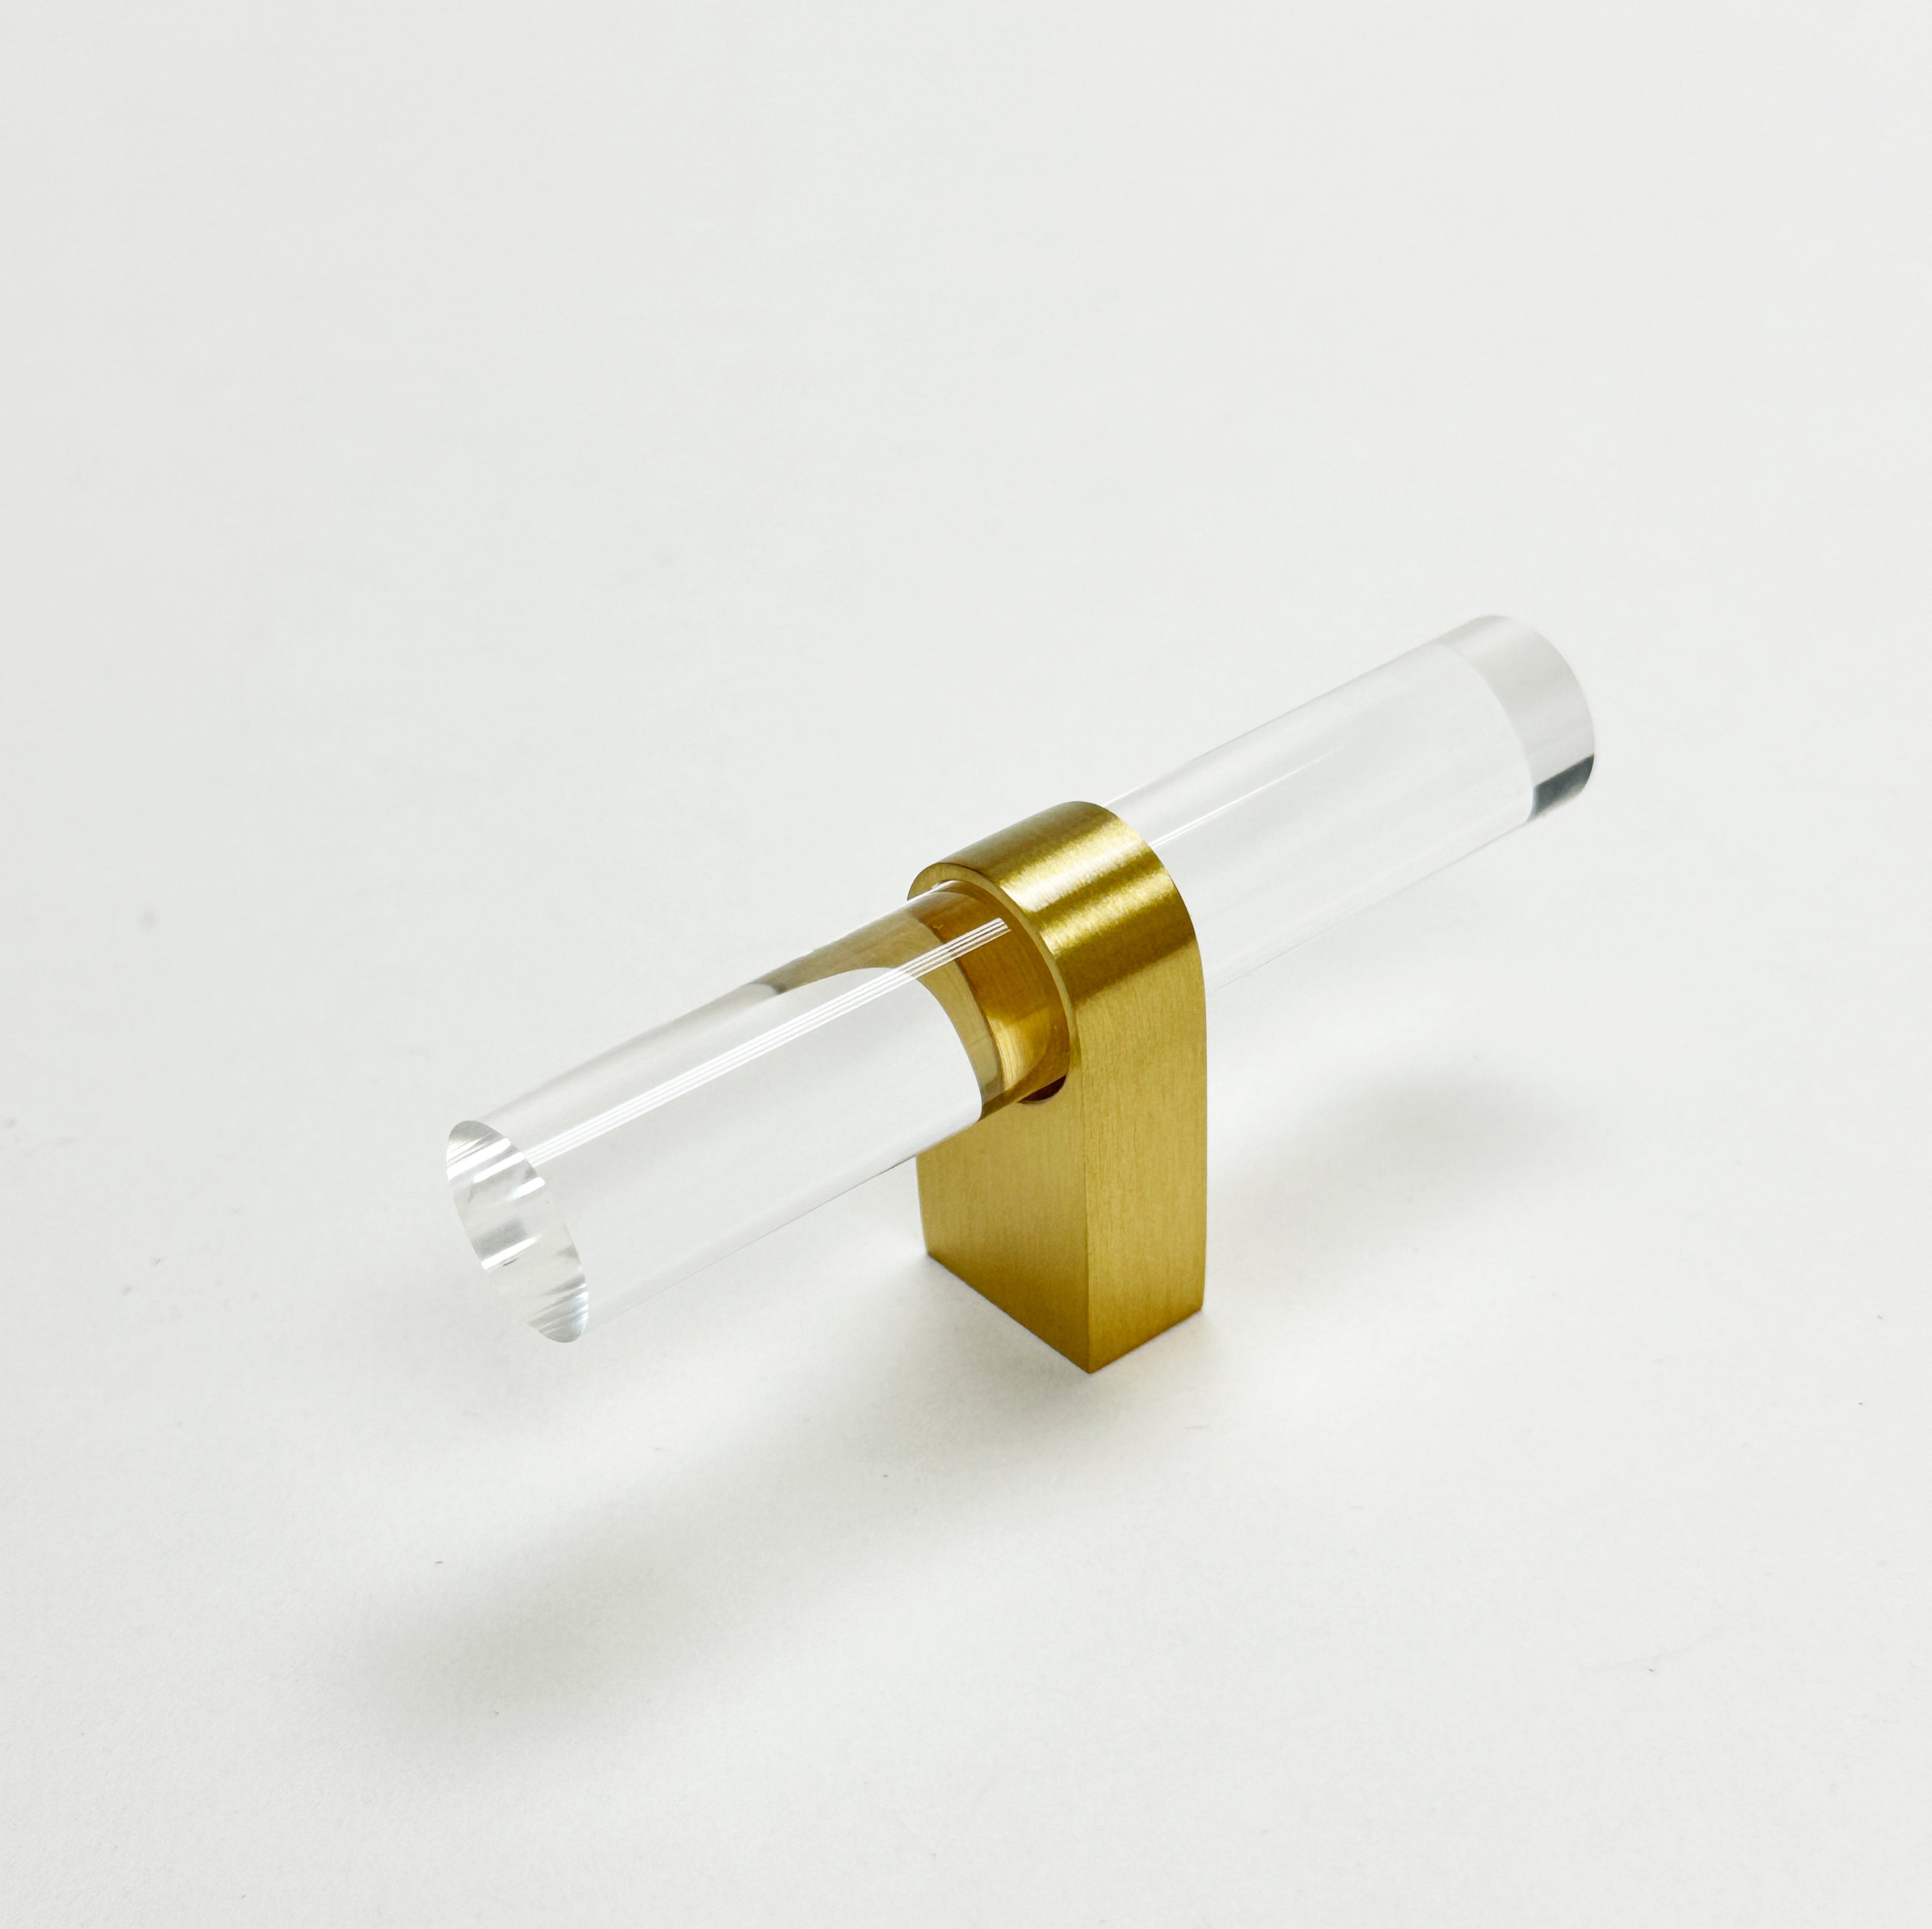 Lucite "June" Brushed Brass Drawer Pulls and Knobs - Industry Hardware